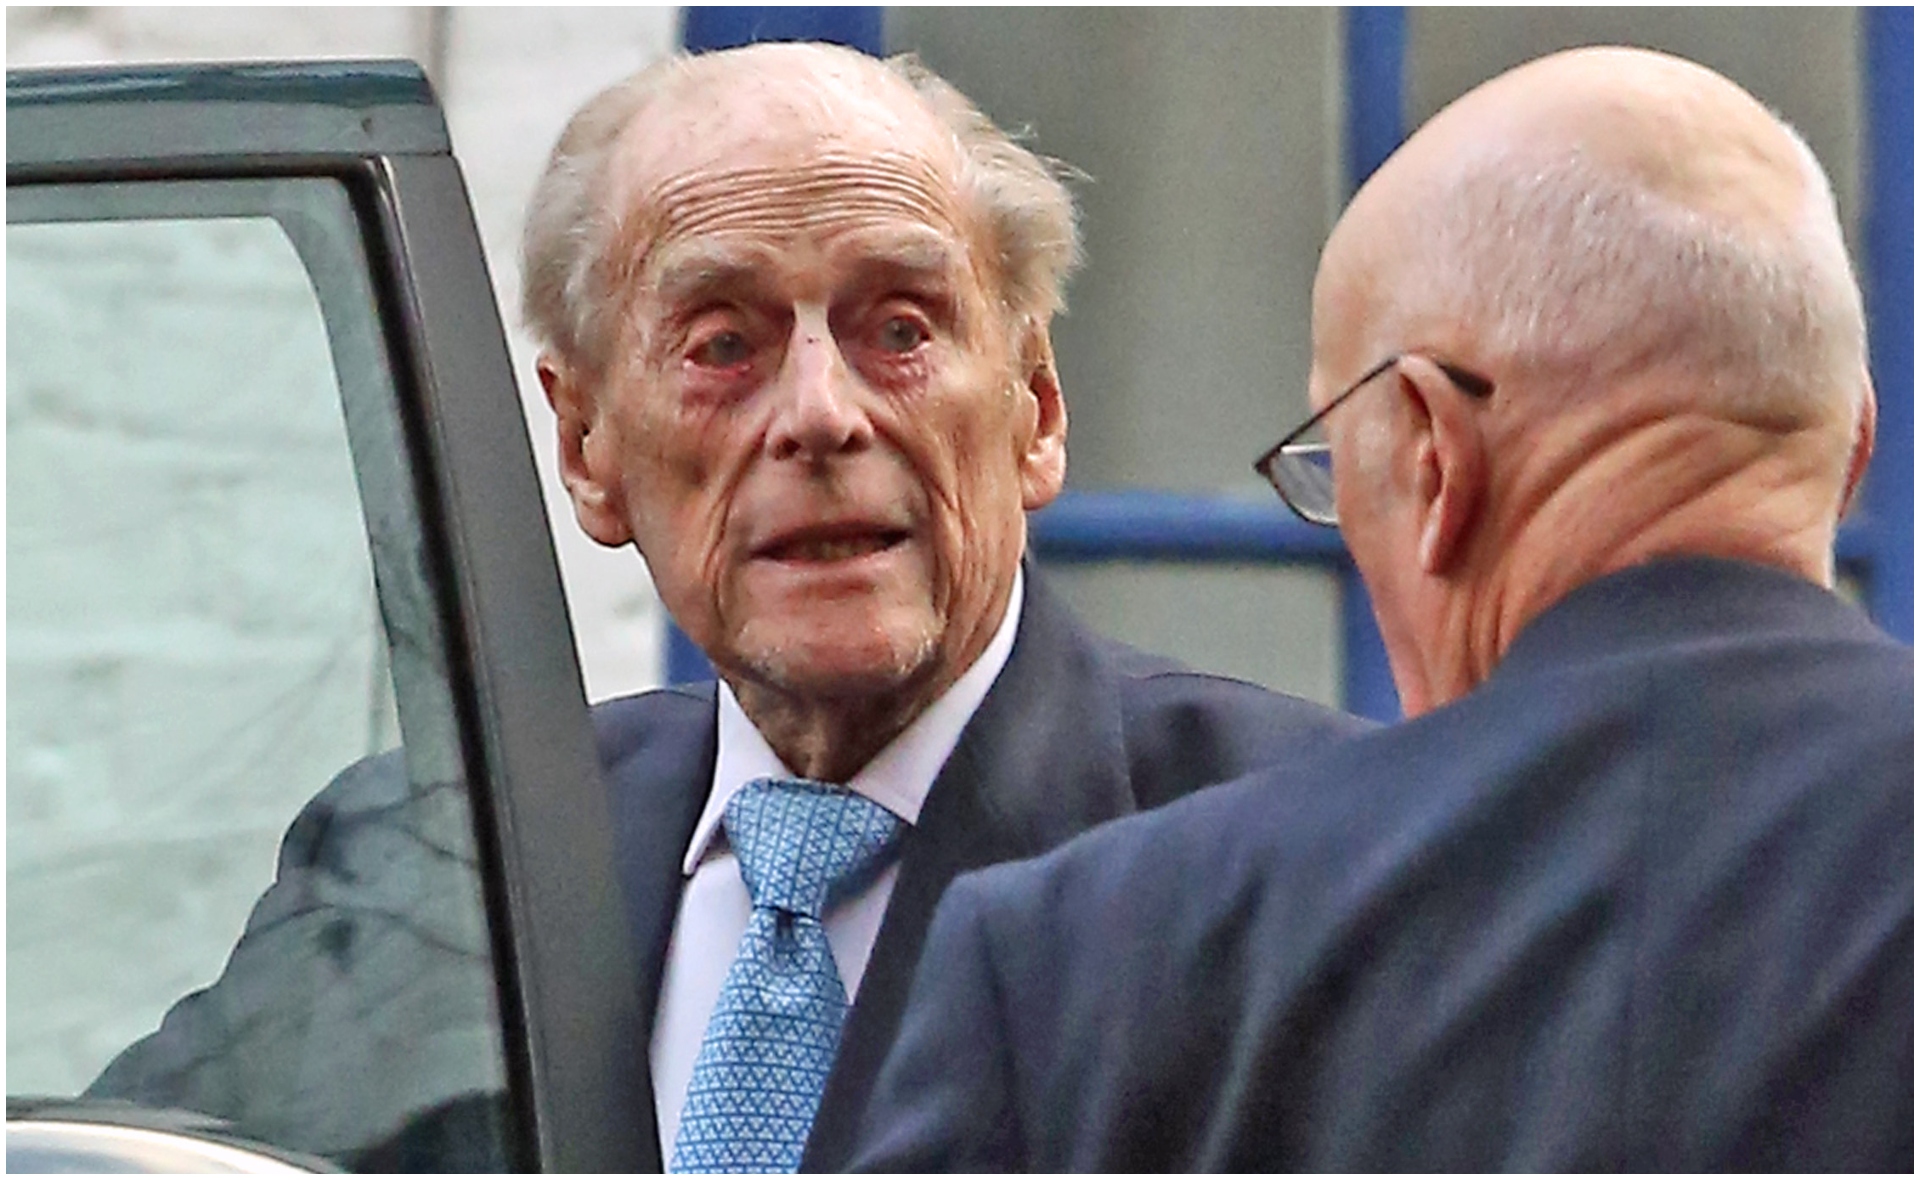 The Palace confirms Prince Philip has been transferred to another hospital in London for an infection and ongoing heart condition